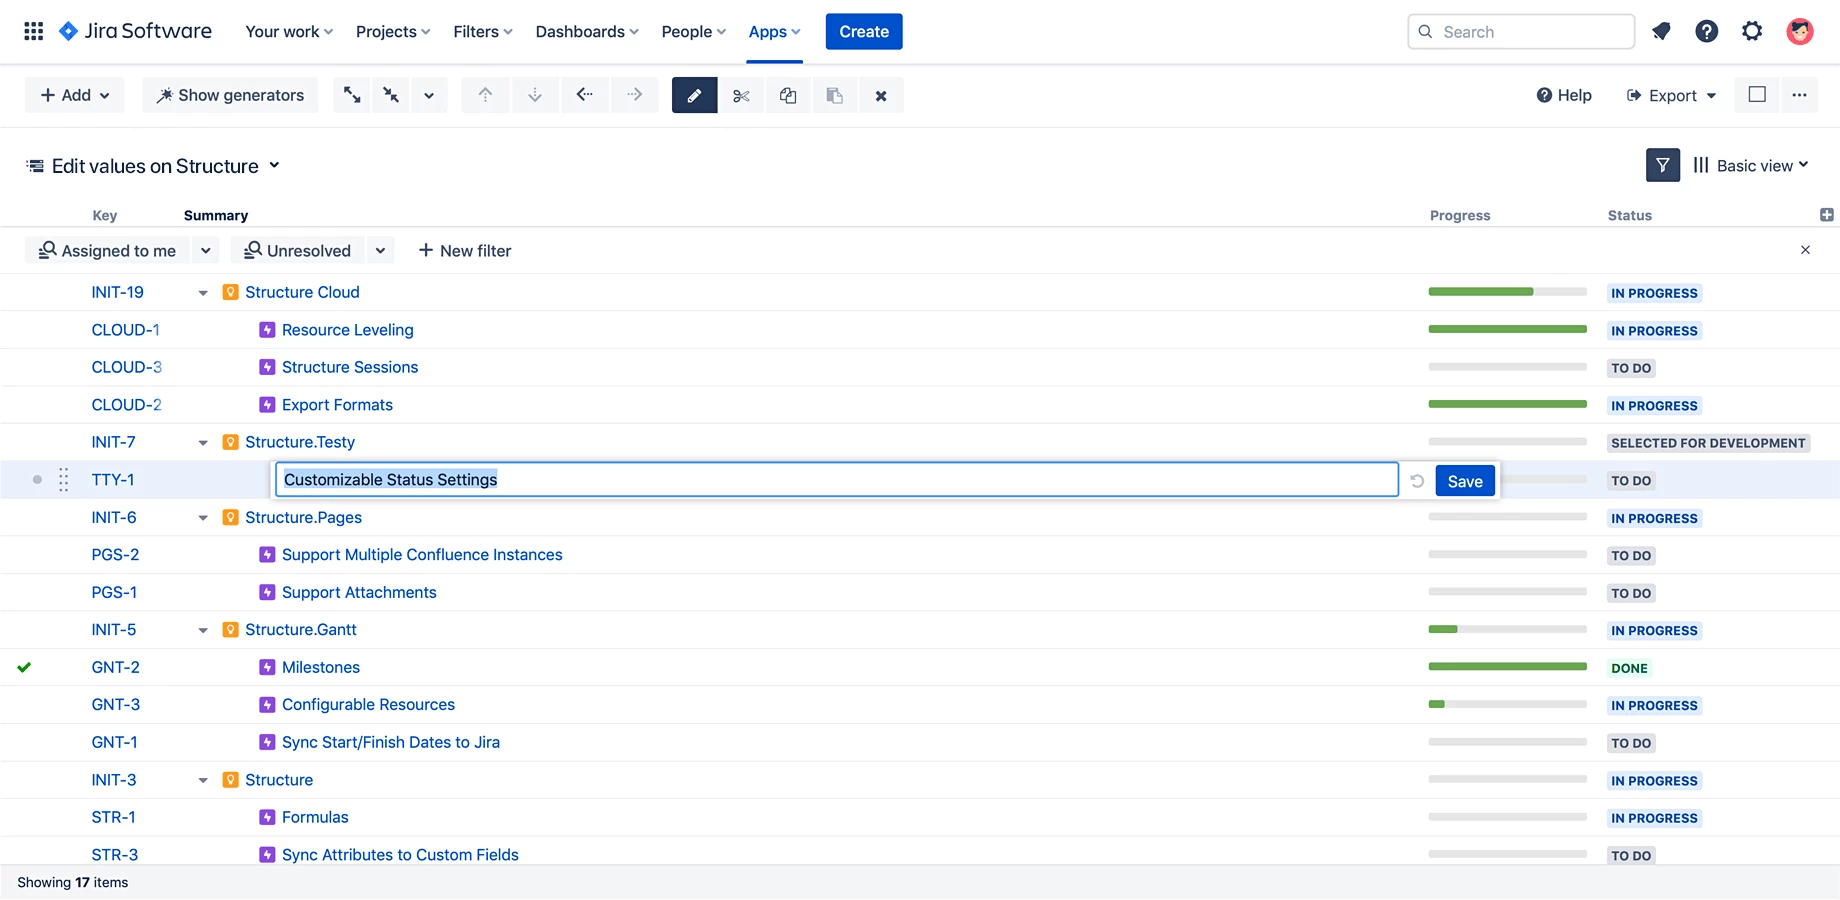 Structure Software - Edit values on the fly – Tired of editing one Jira issue at a time? Save time with in-line editing. Just double-click to edit a value directly in Structure. The changes are saved to the Jira issue instantly.